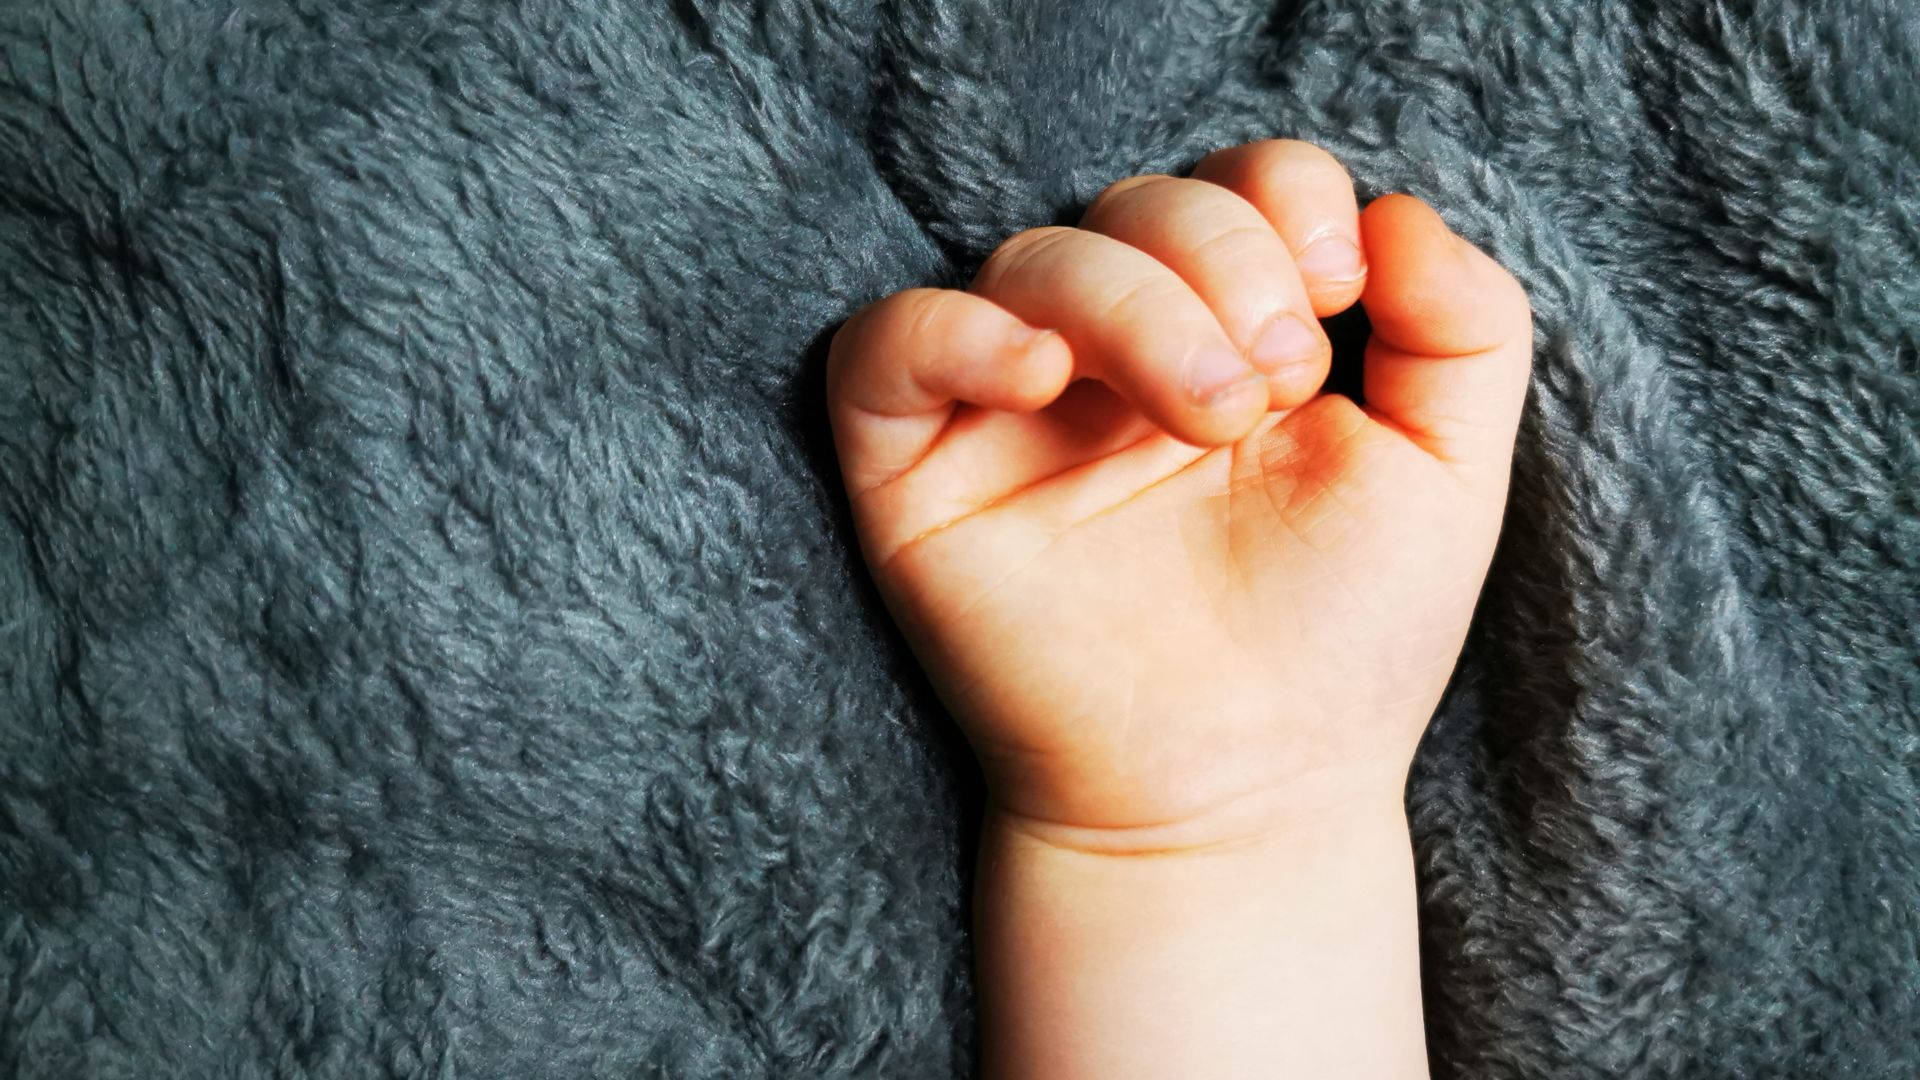 Baby Hand On A Cozy Blanket Wallpaper